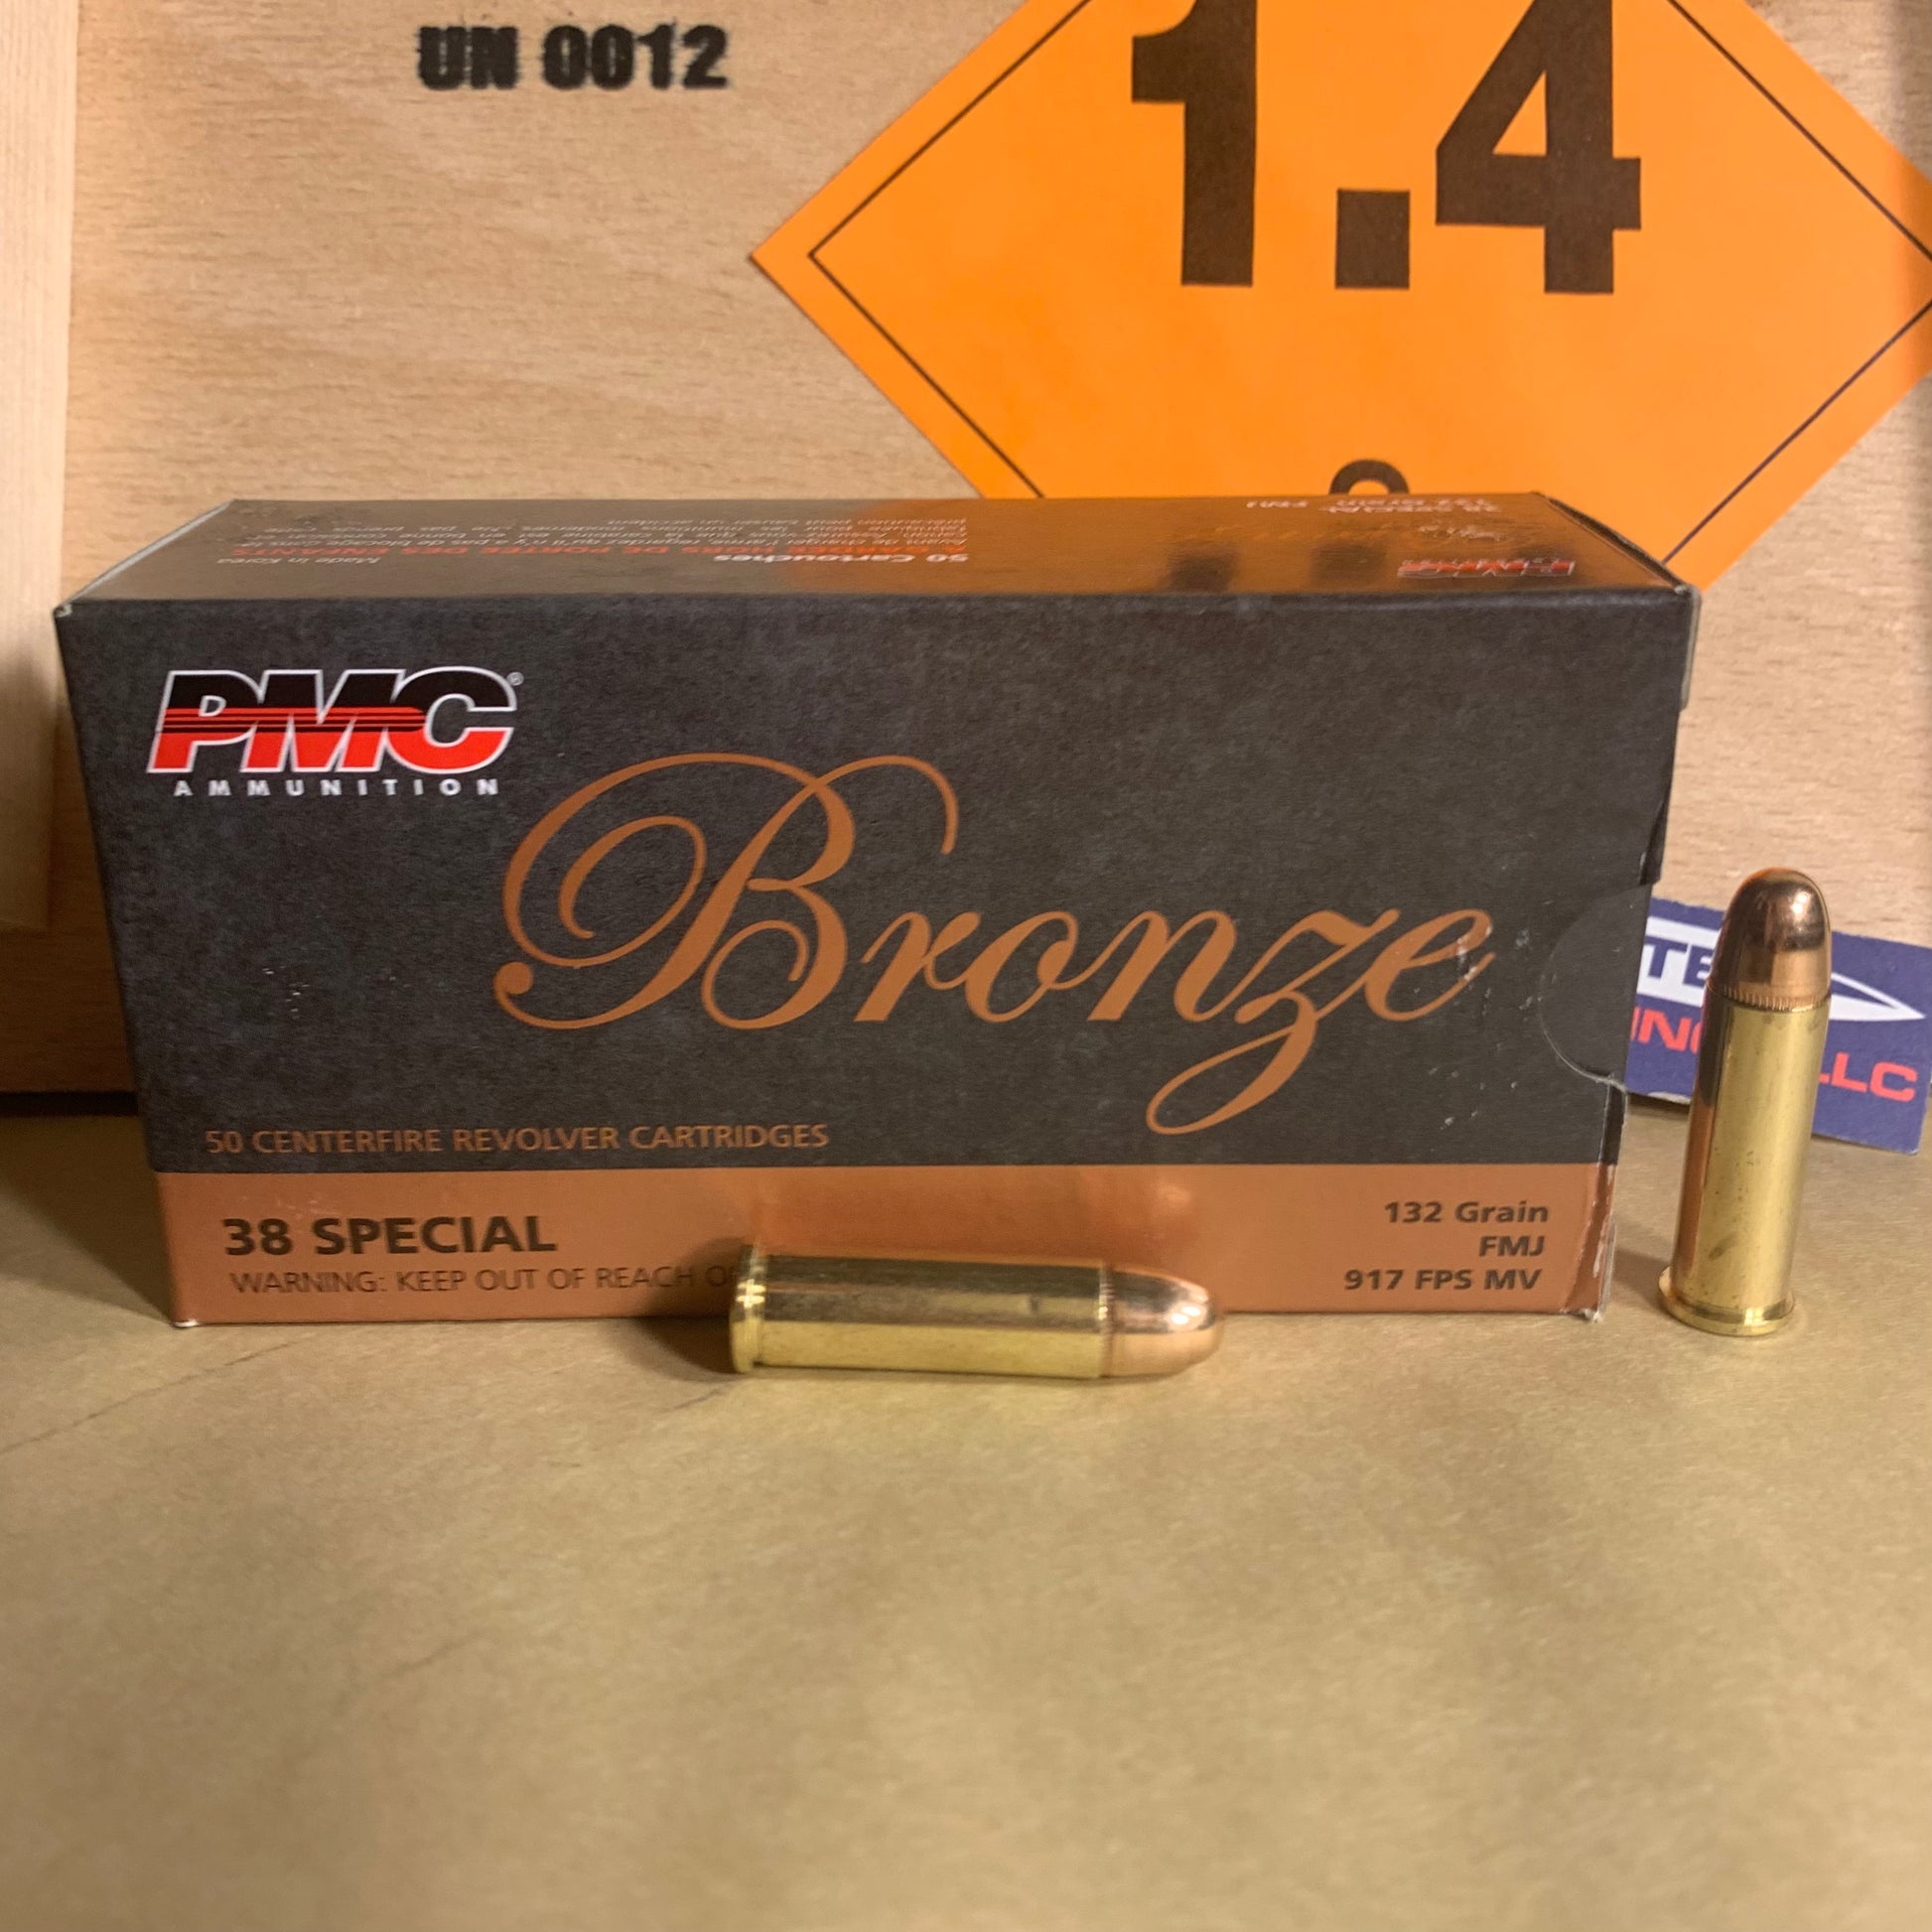 50 Round Box PMC Bronze .38 Special Ammo 132gr FMJ - 38G – Crate ...